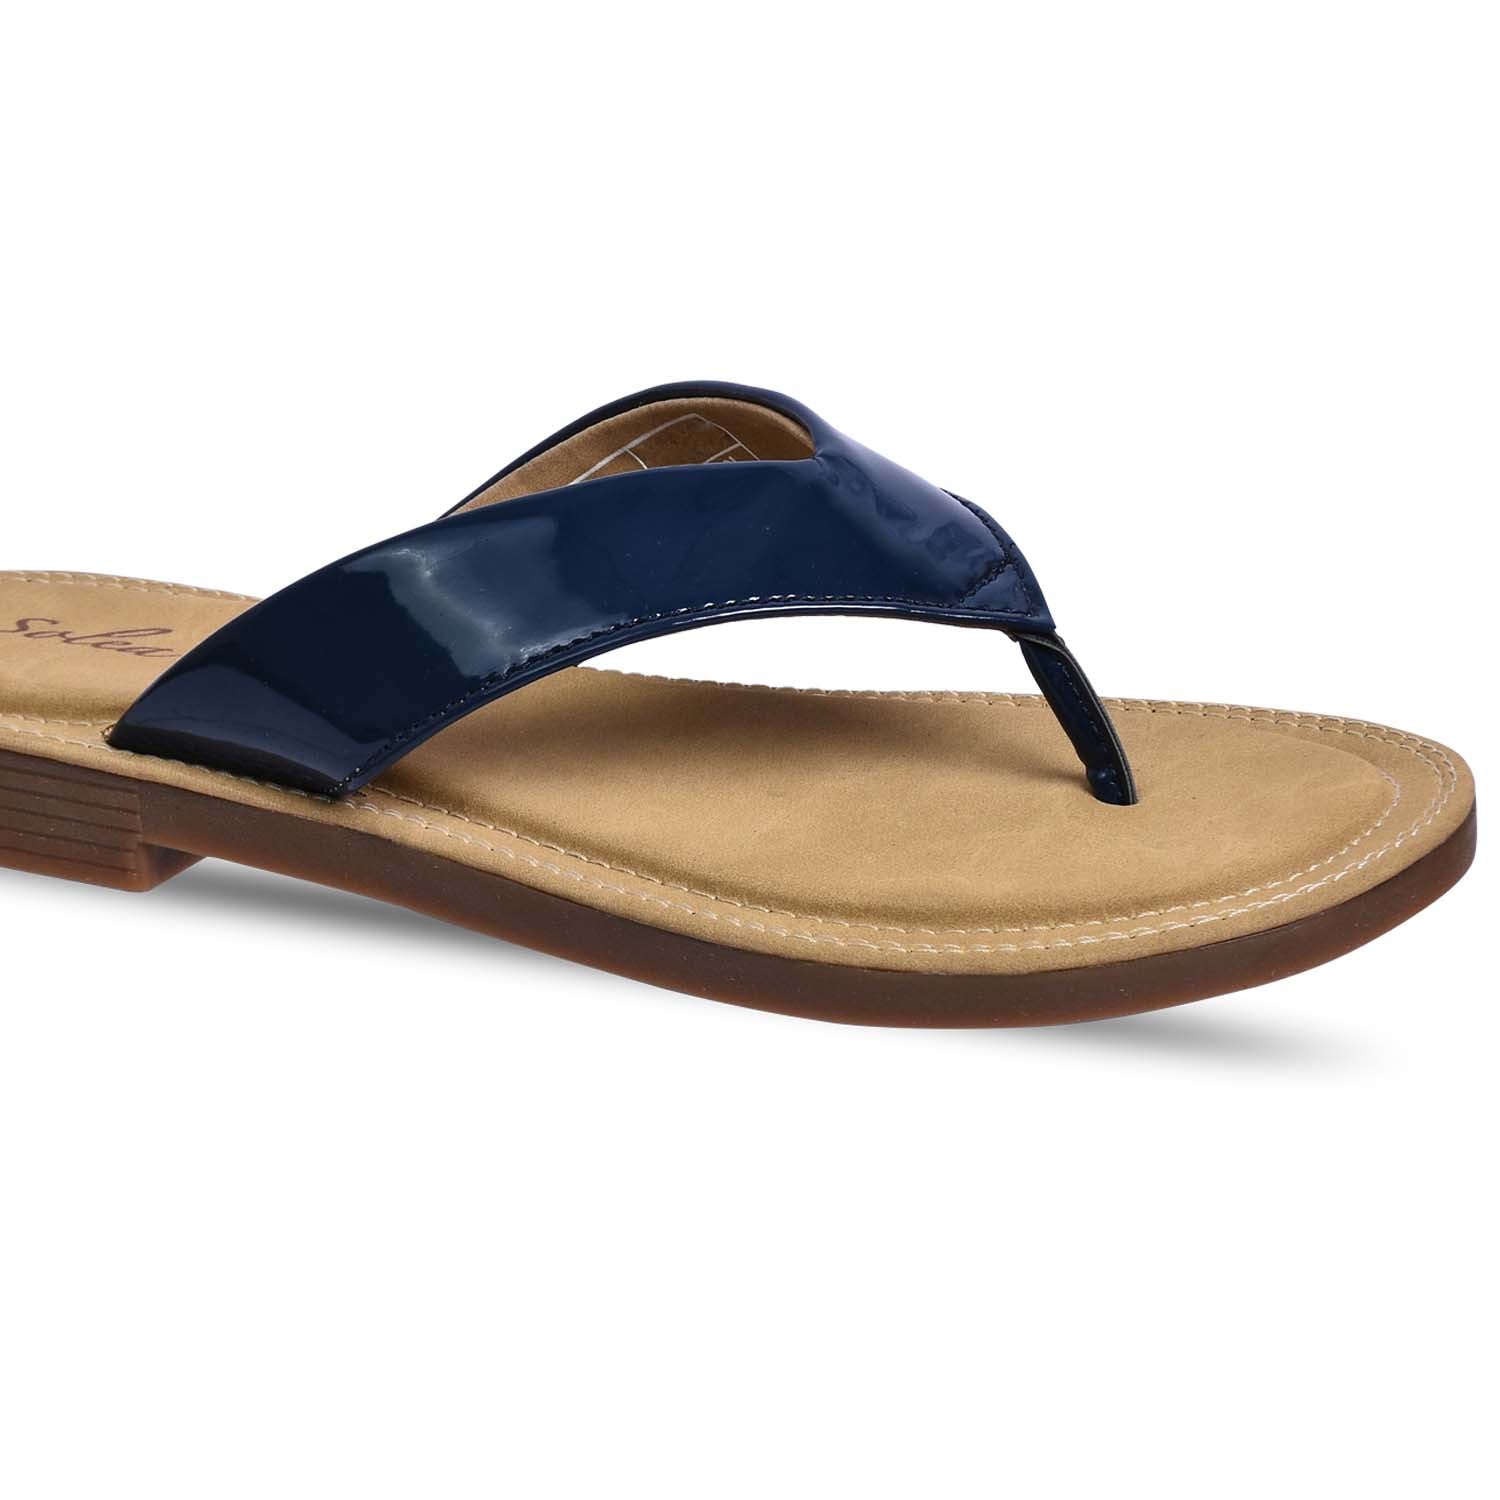 Paragon R1000L Women Sandals | Casual &amp; Formal Sandals | Stylish, Comfortable &amp; Durable | For Daily &amp; Occasion Wear